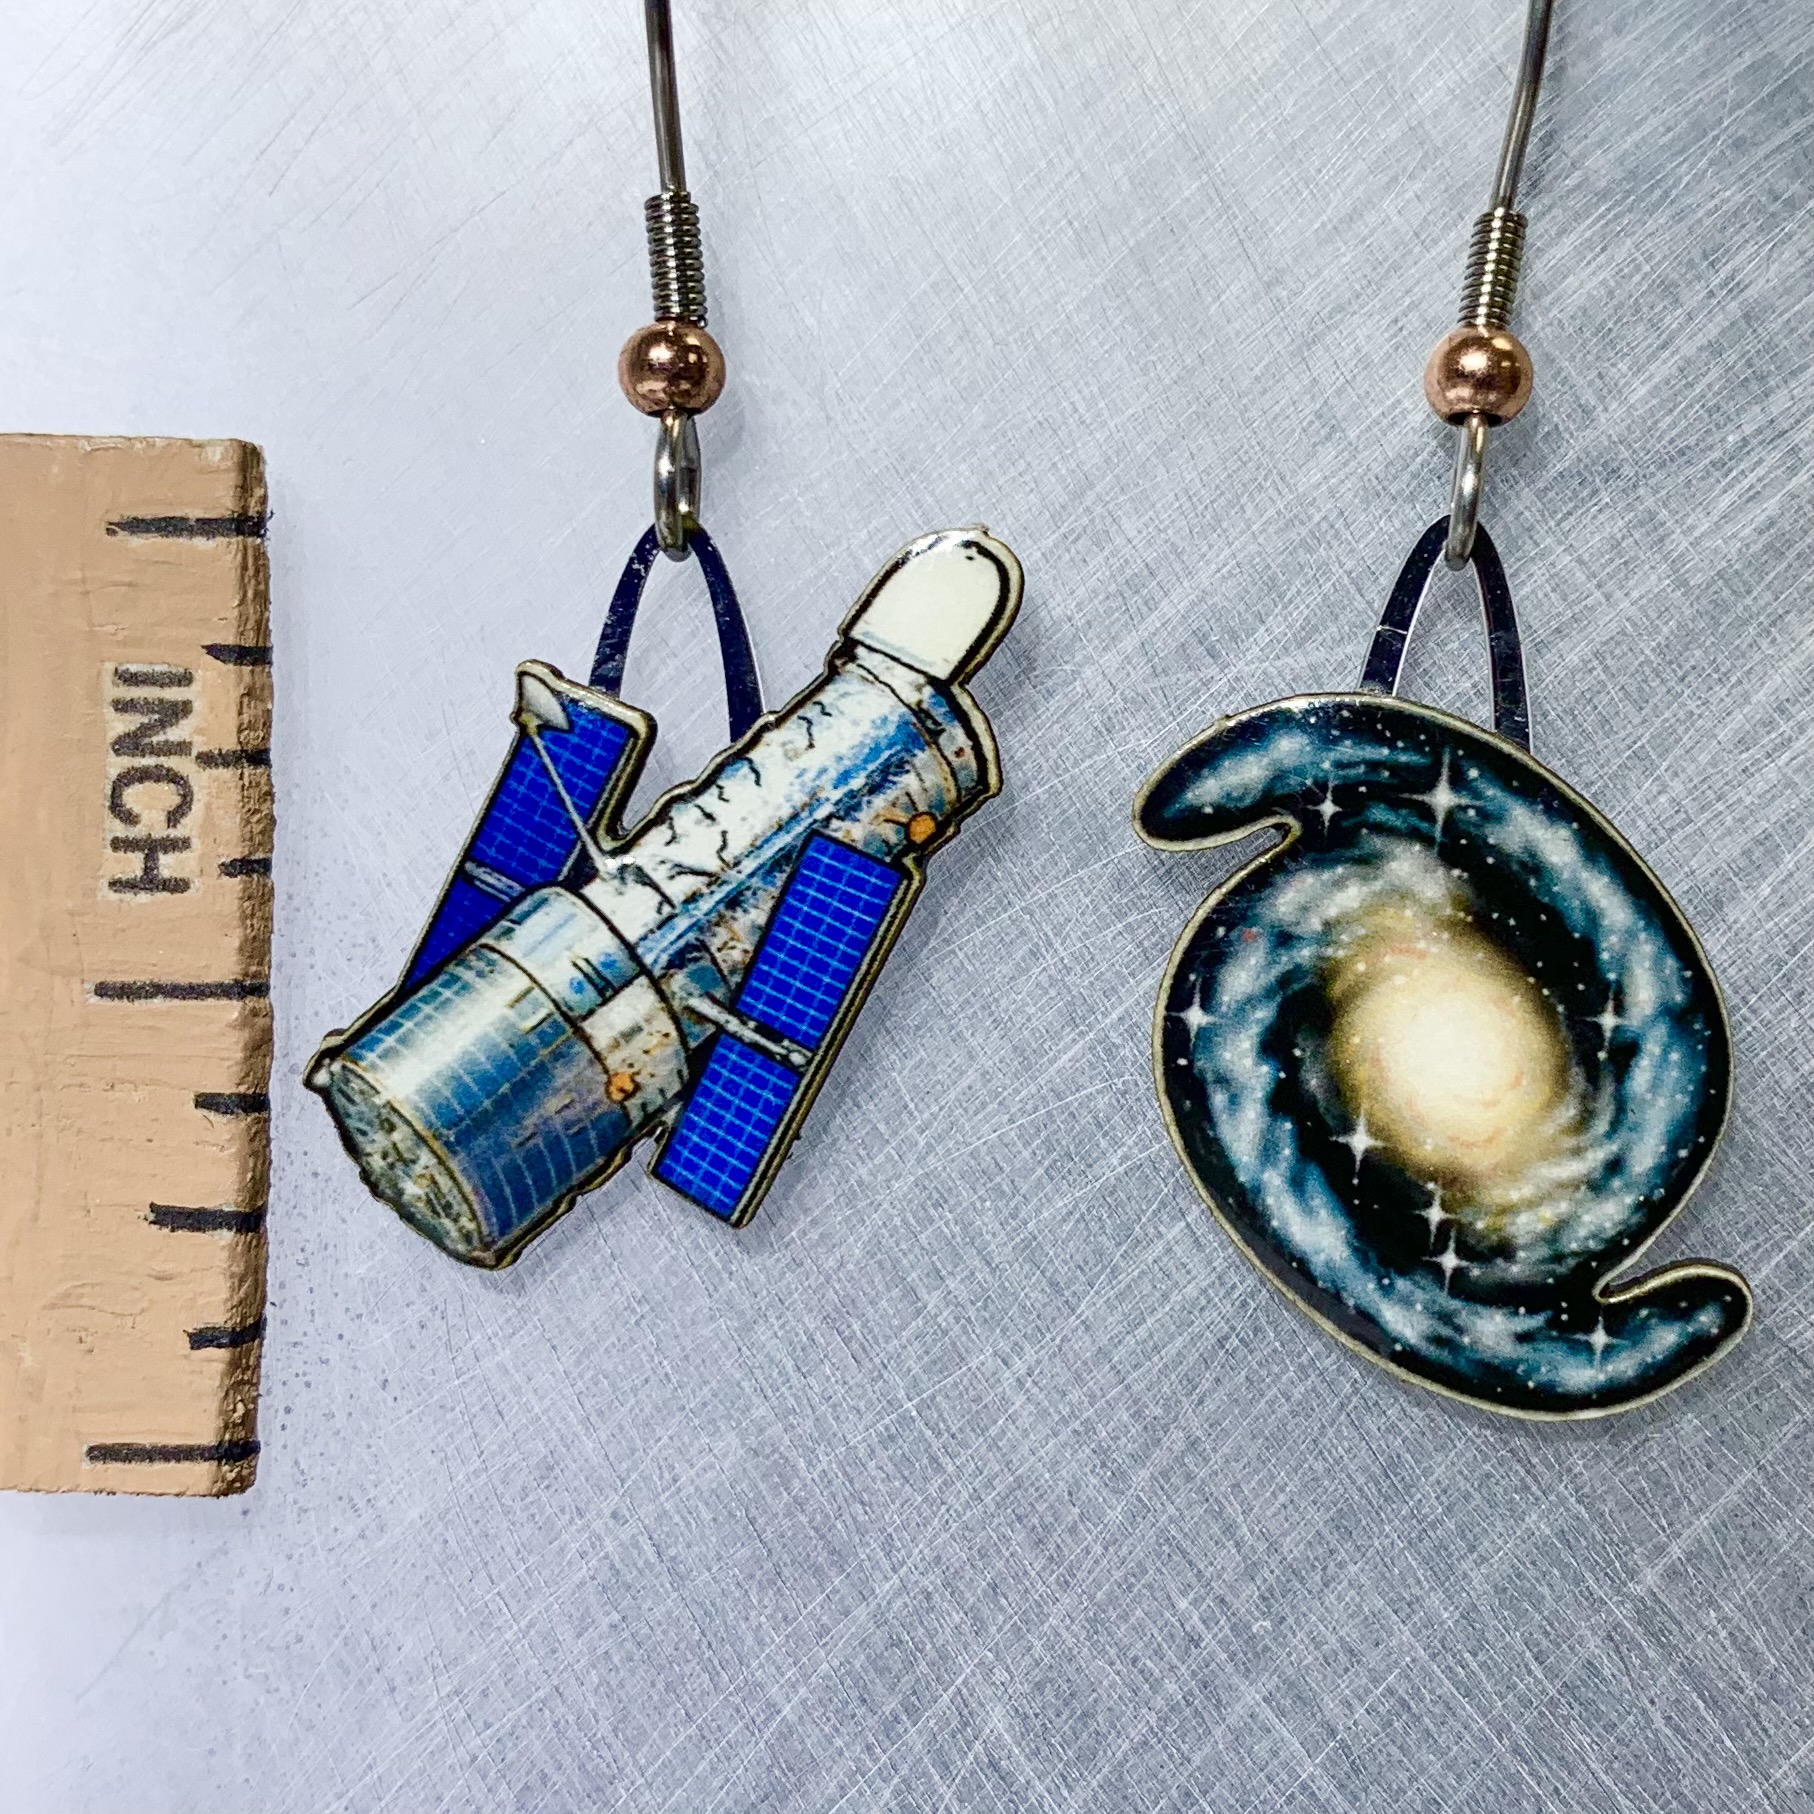 Picture shown is of 1 inch tall pair of earrings of the Hubble Telescope.